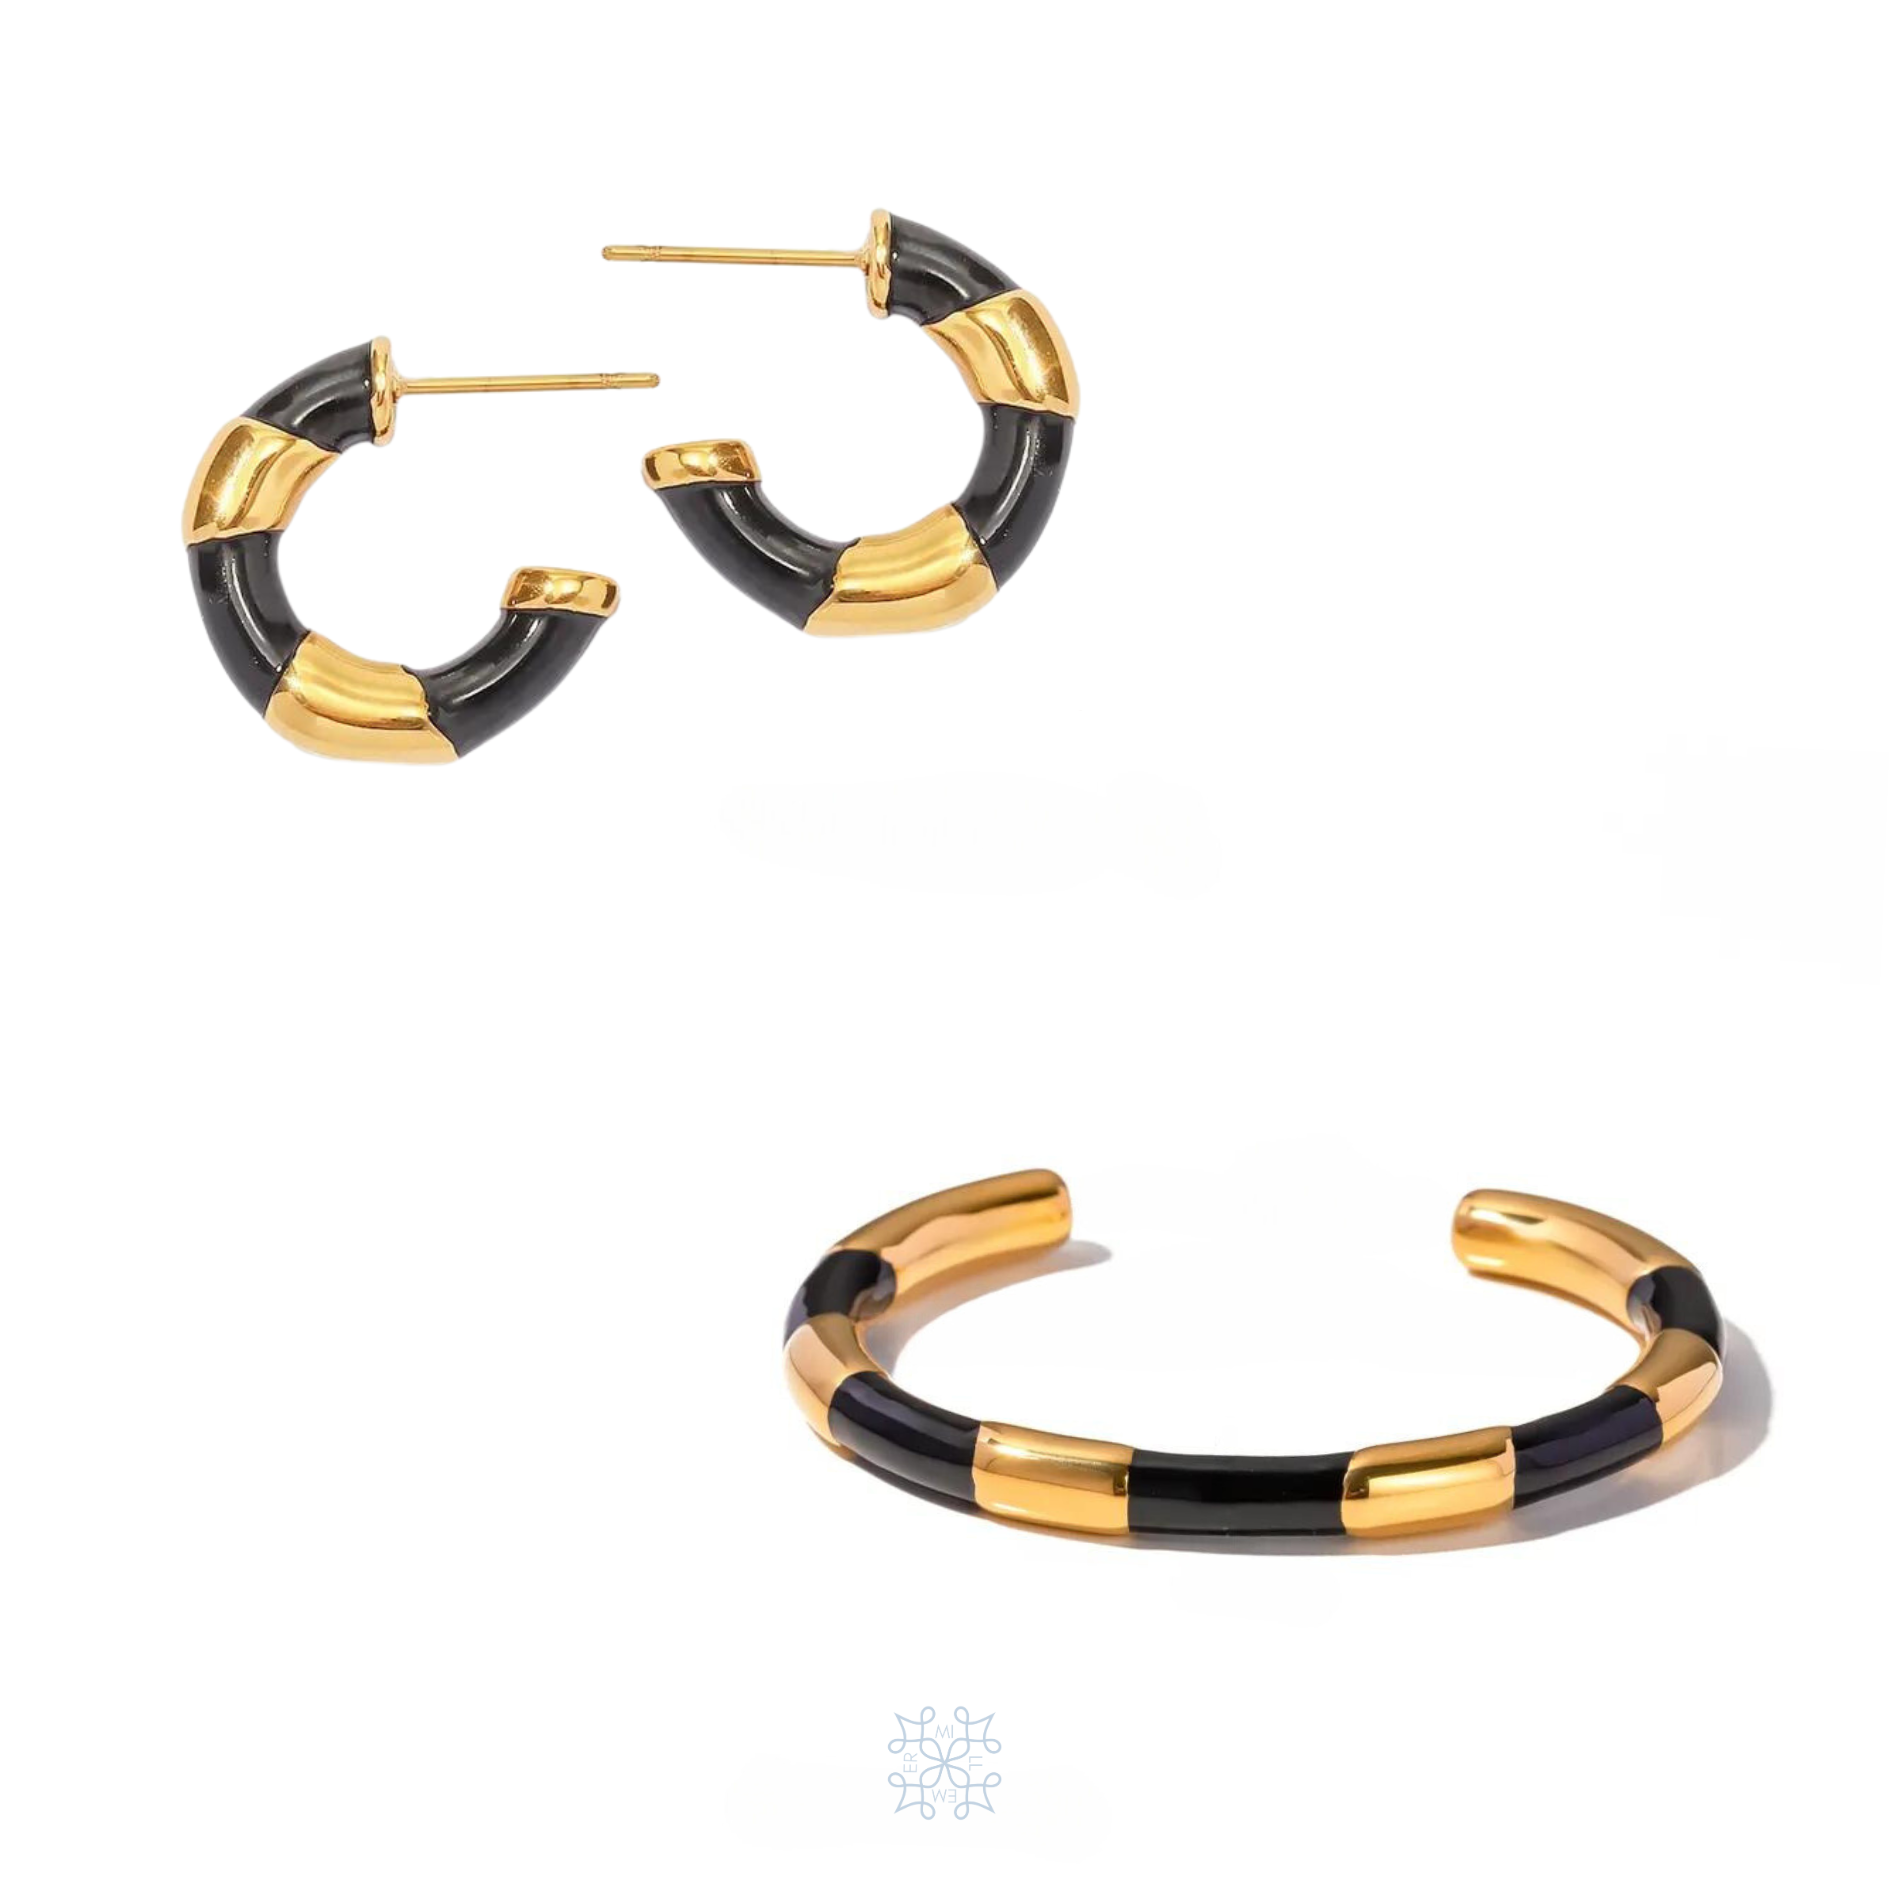 JEWELRY SET WITH PAIR OF HOOP EARRINGS AND A BANGLE BRACELET. BOTH PIECES ARE PAINTED IN BLACK ENAMEL CREATING THE SHAPE OF A RIBBON AROUND THE GOLD SURFACE.